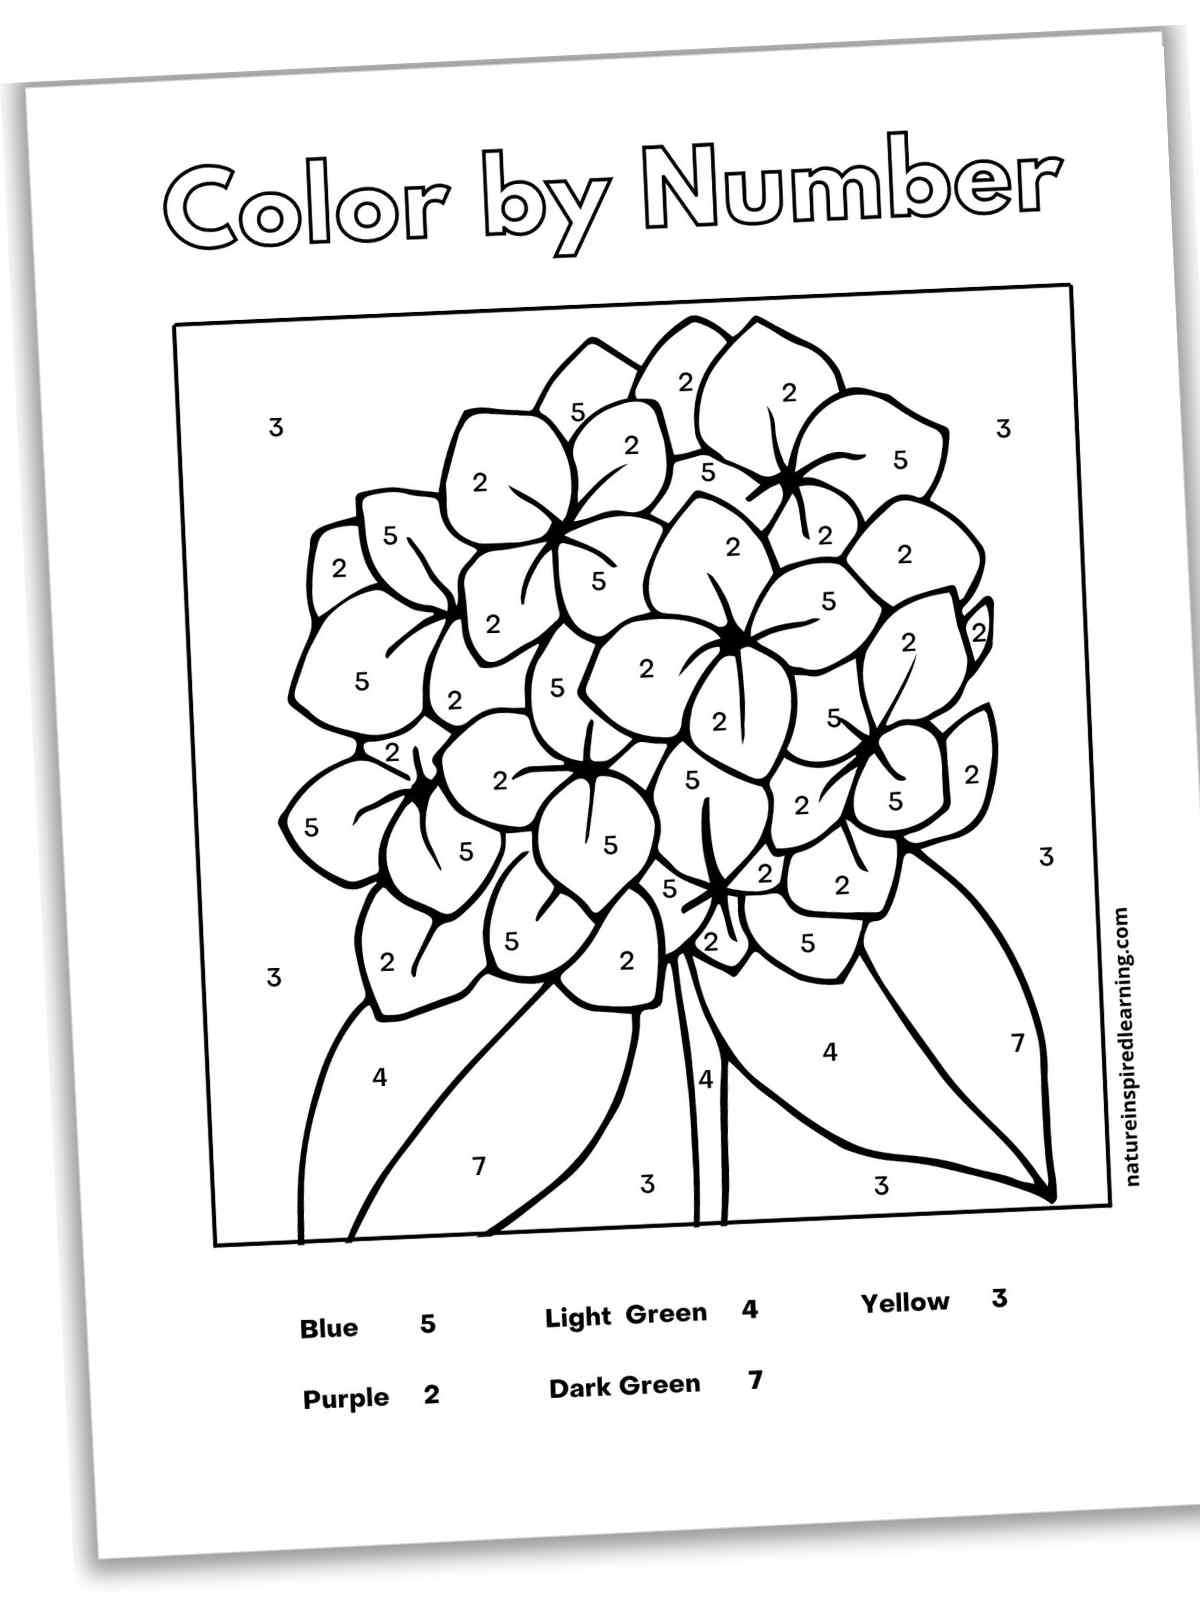 black and white sheet with a large hydrangea bloom with two leaves within a square with numbers on each petal, stem, leaves, and the background. Color key at the bottom.